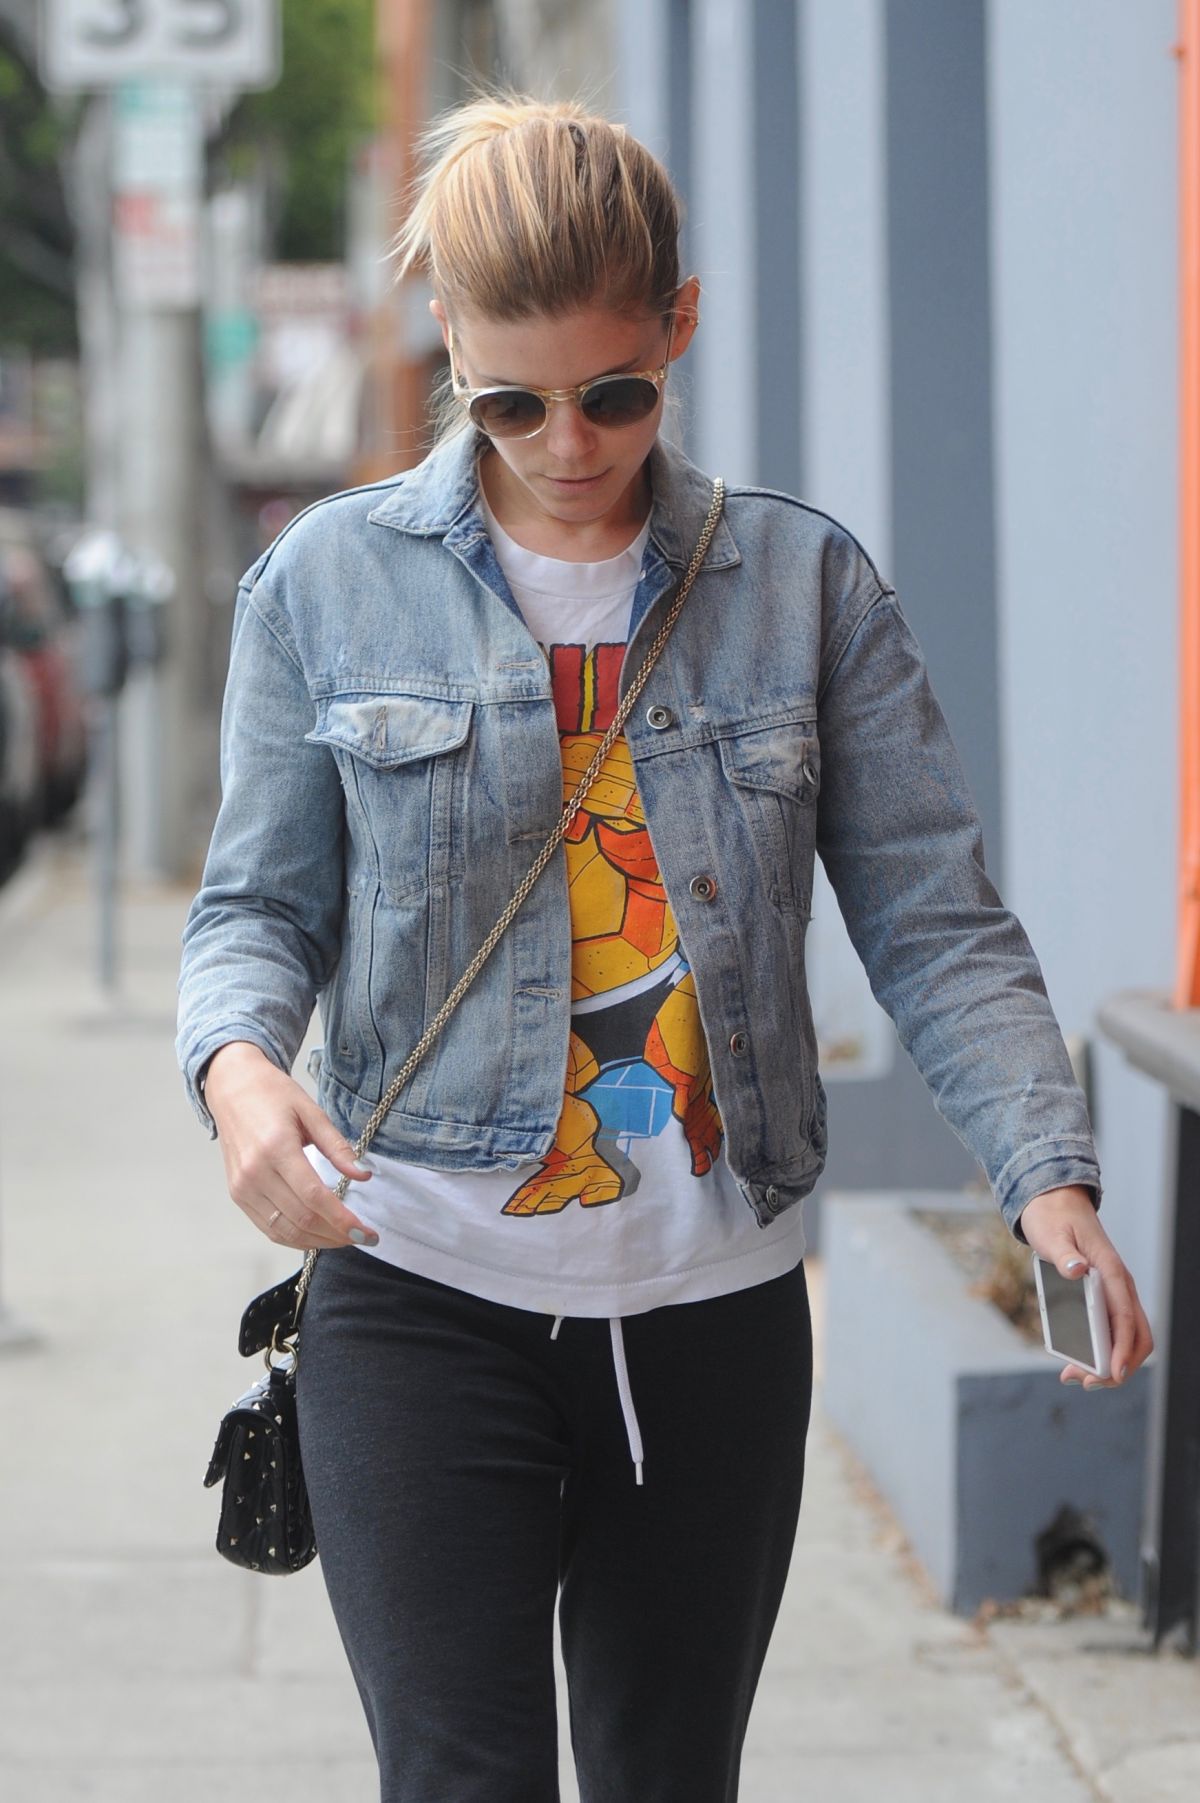 KATE MARA Out and About in Los Angeles 05/25/2017 – HawtCelebs